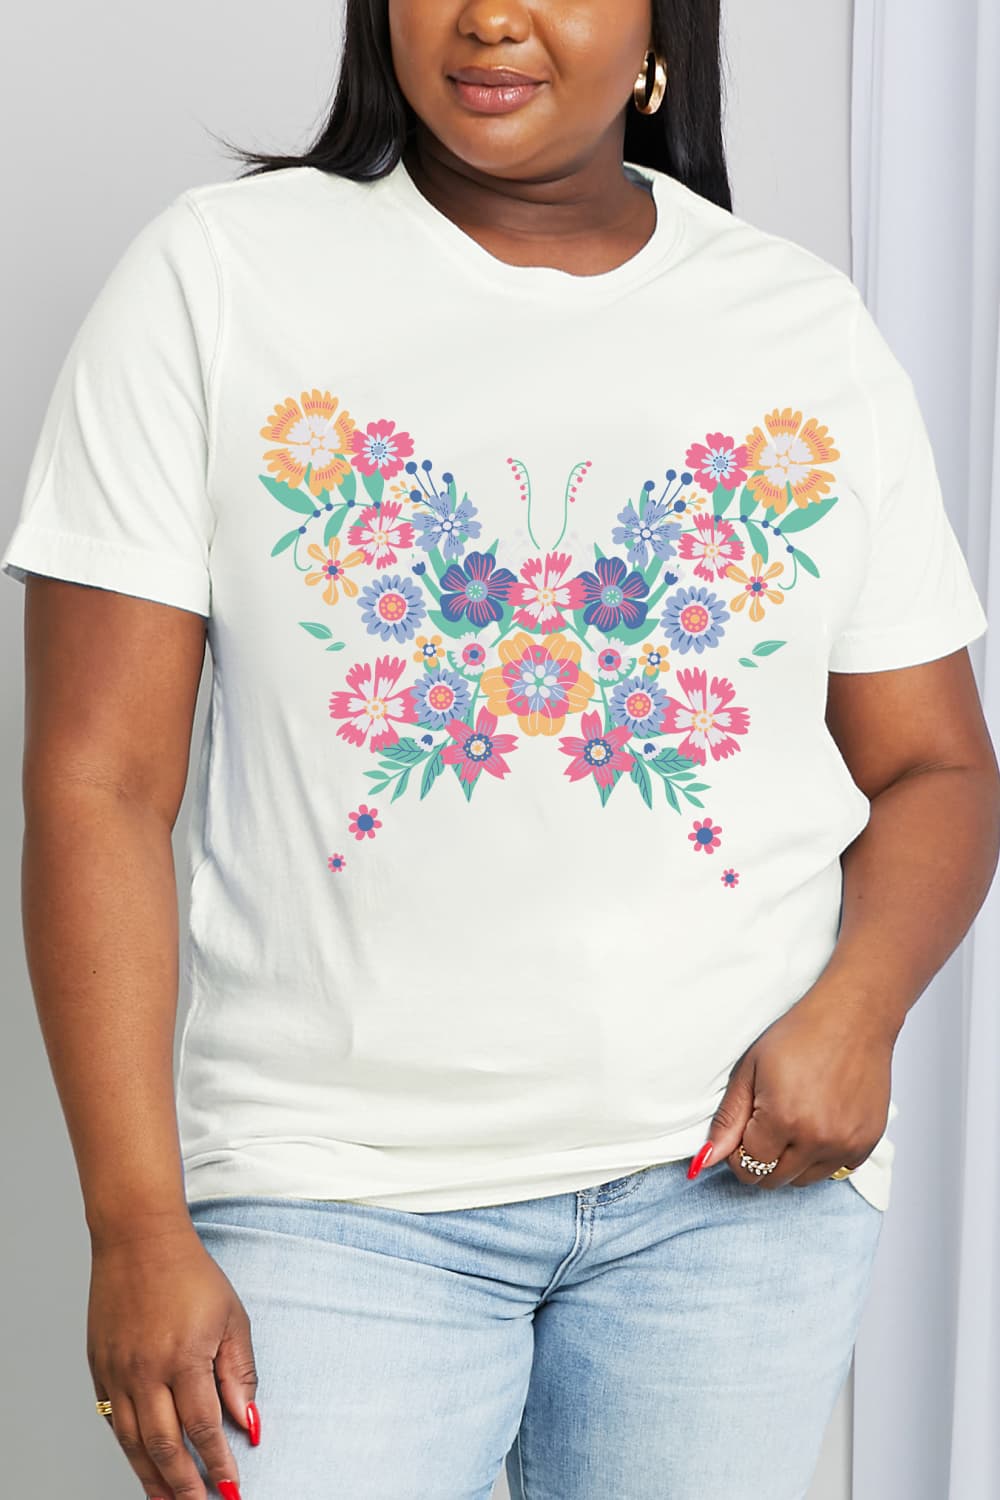 Simply Love Simply Love Full Size Flower Butterfly Graphic Cotton Tee